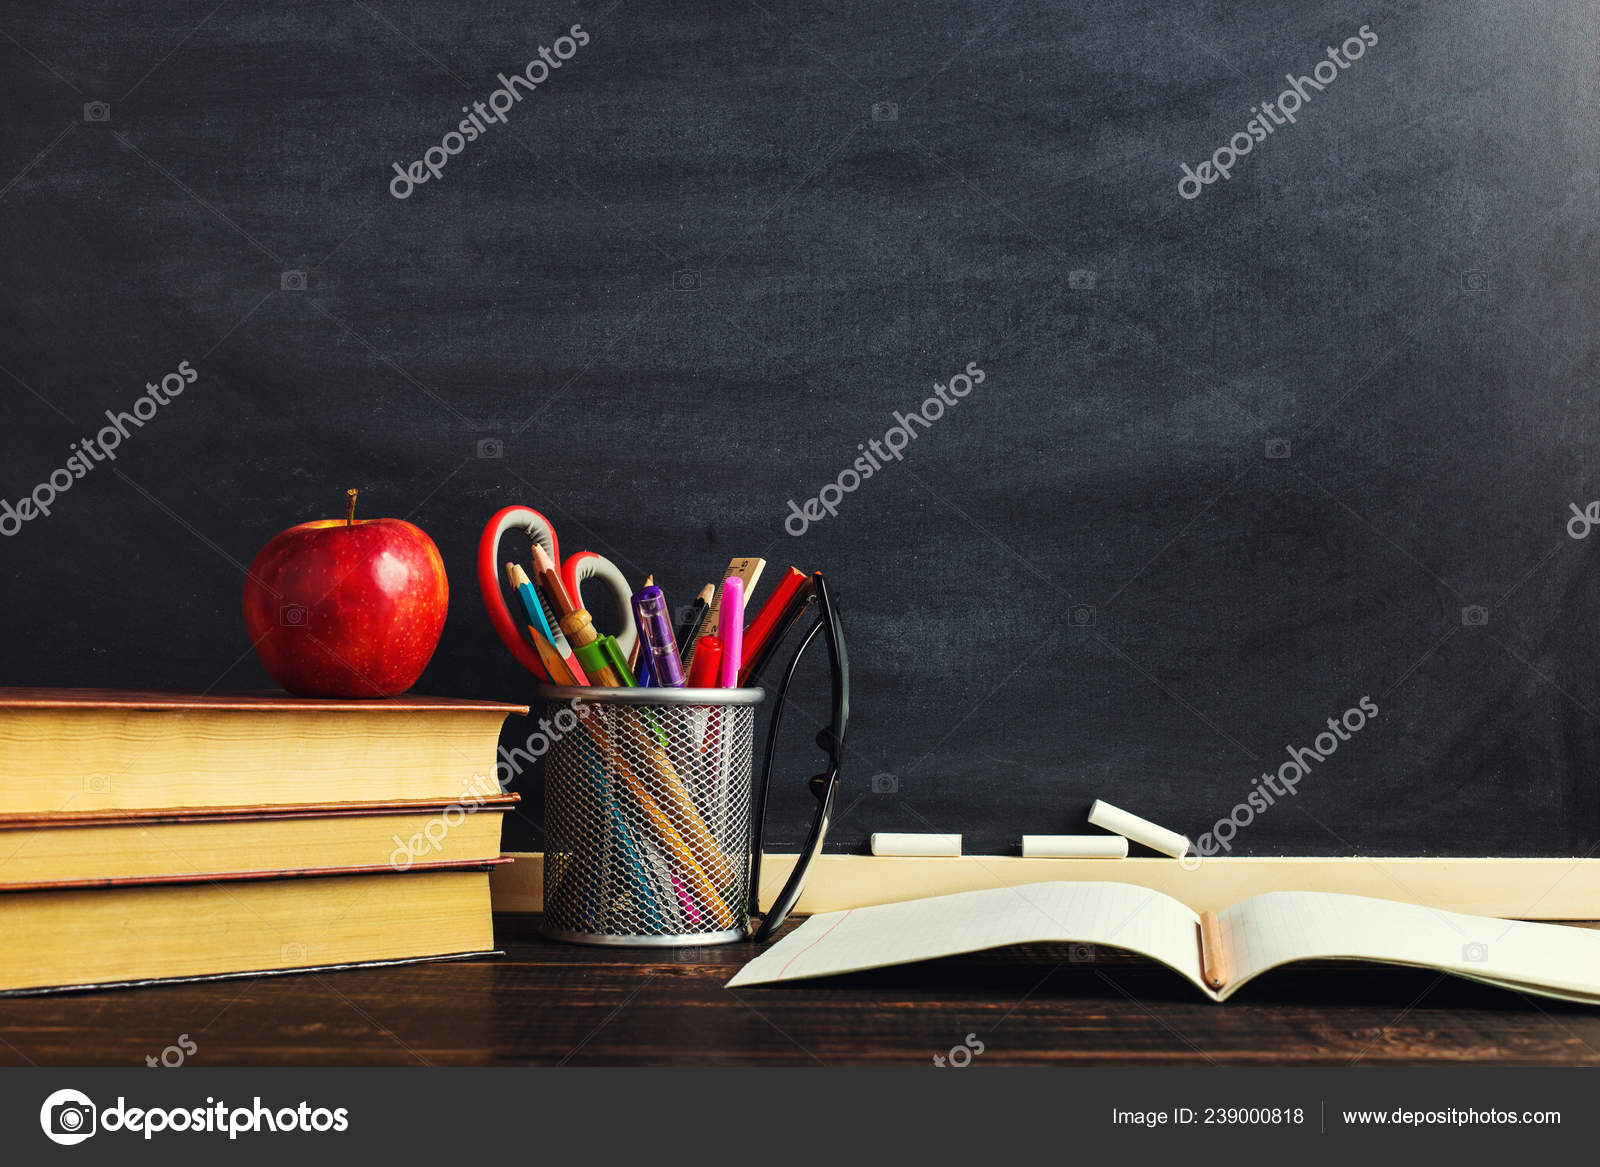 School supplies with blank writing book Stock Photo by